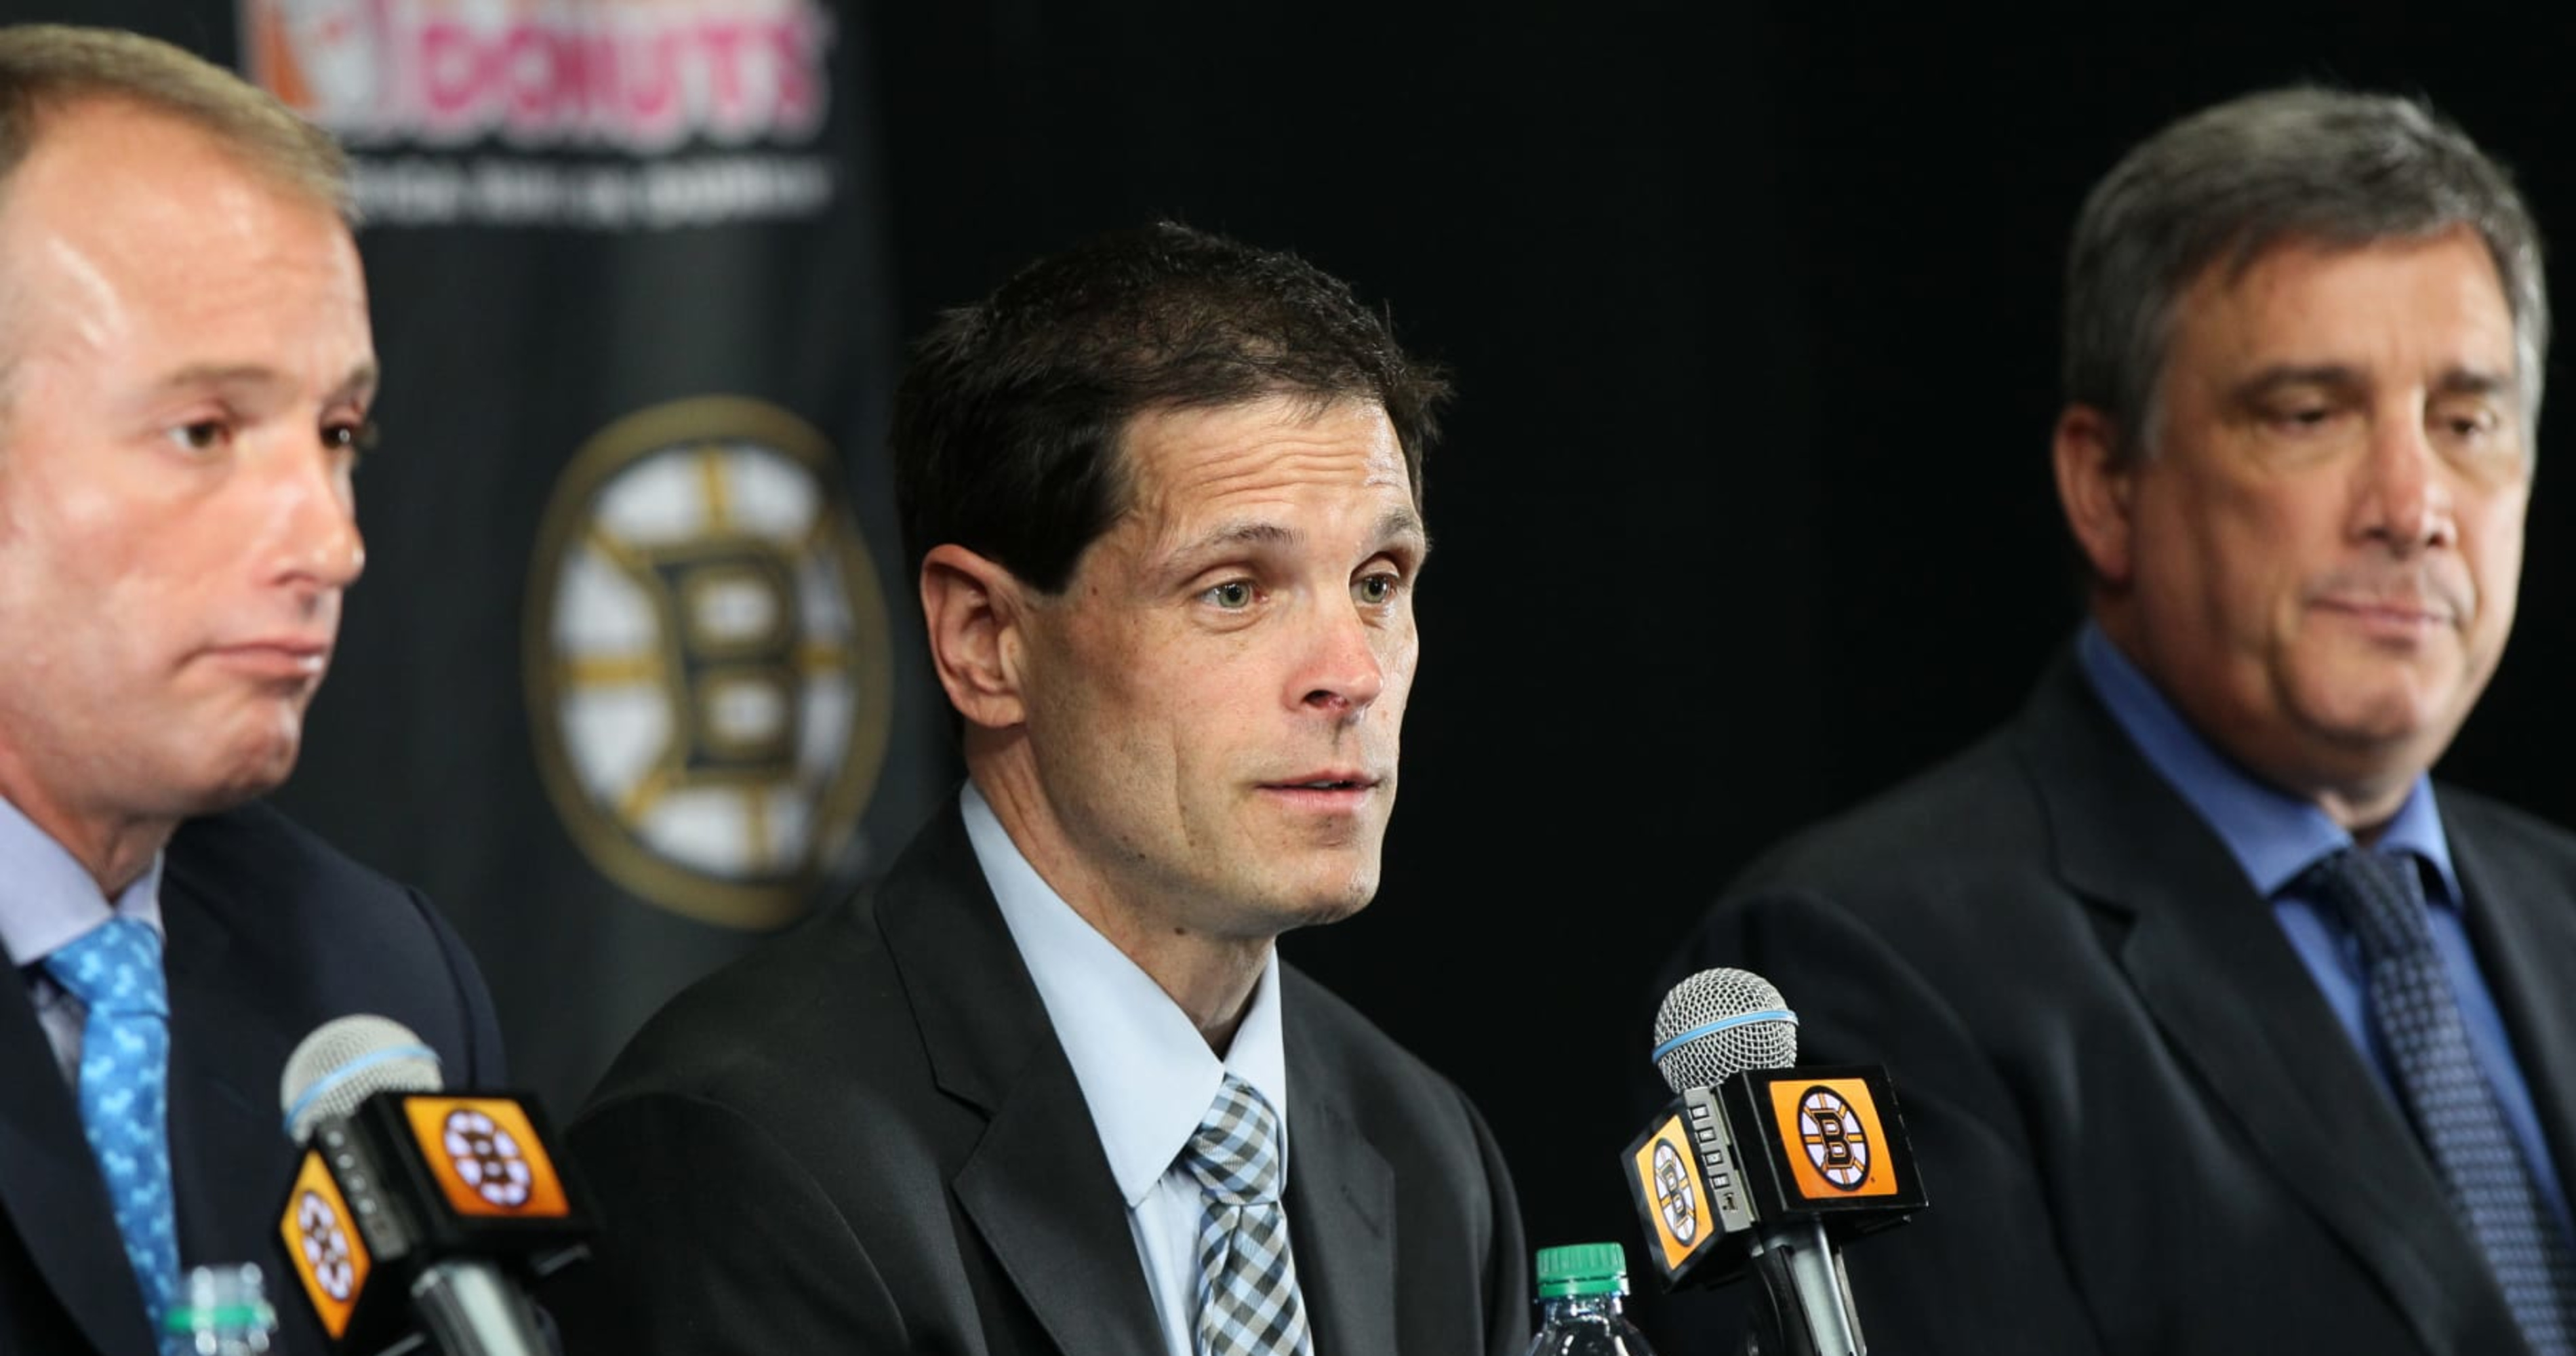 Bruins sign Mitchell Miller, who bullied, racially abused